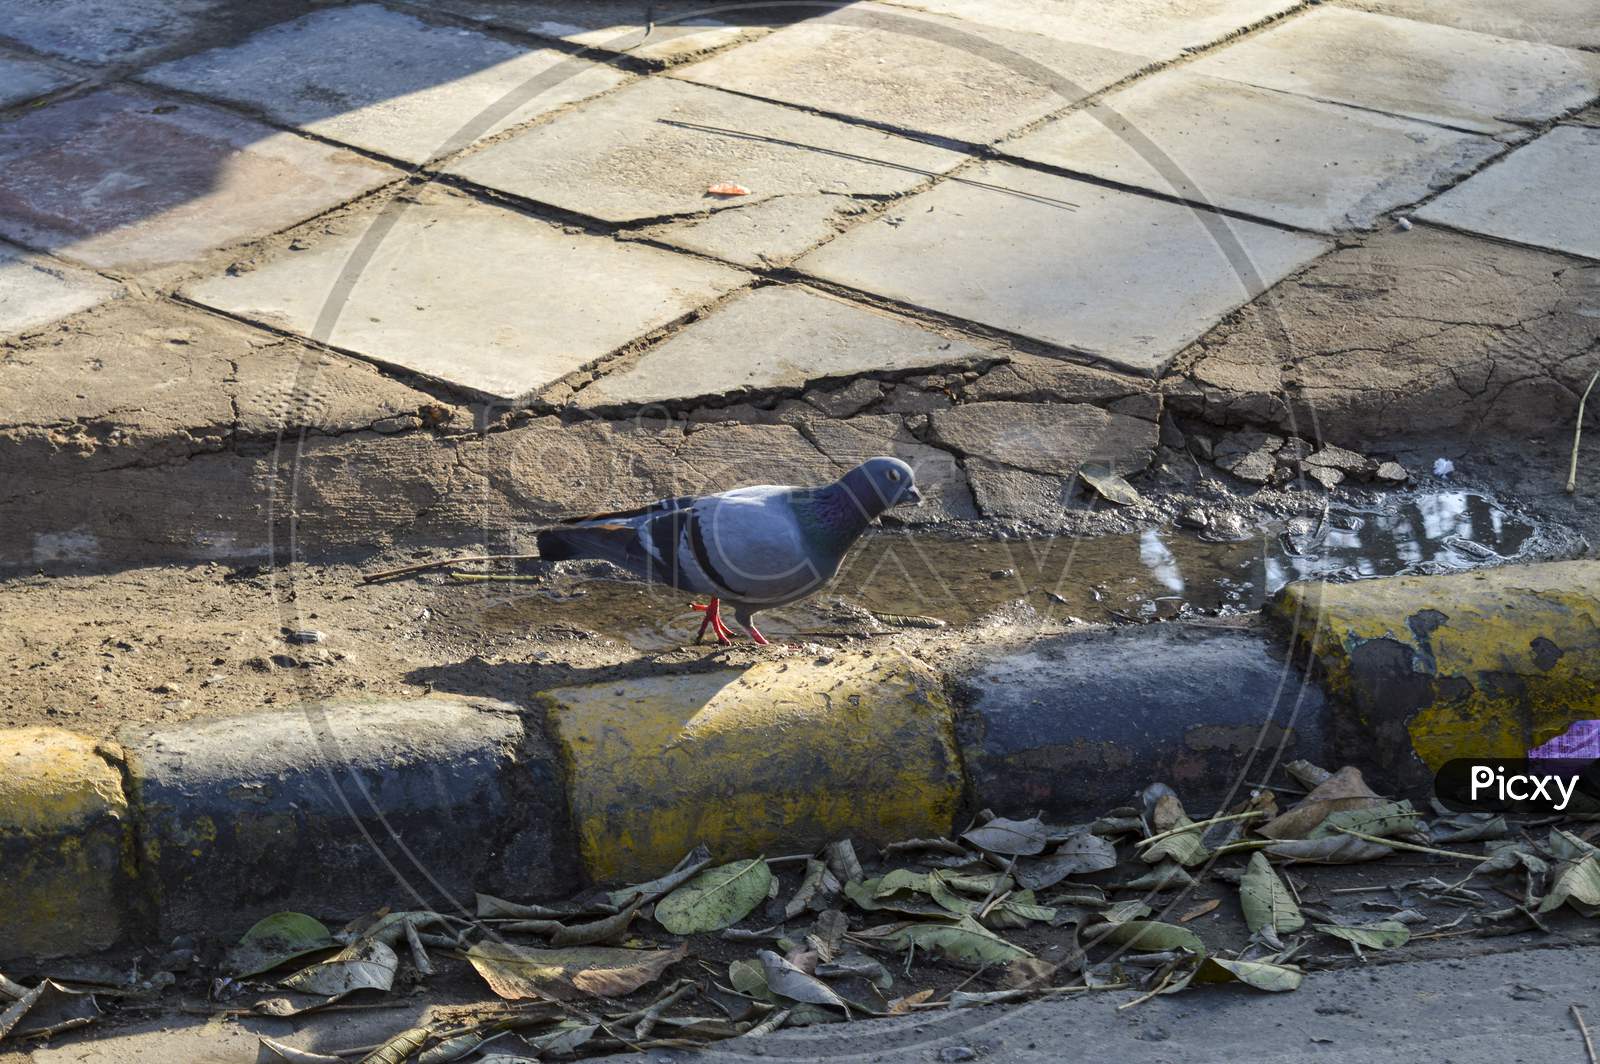 A Pigeon Is Walking Around For Food On Ground.